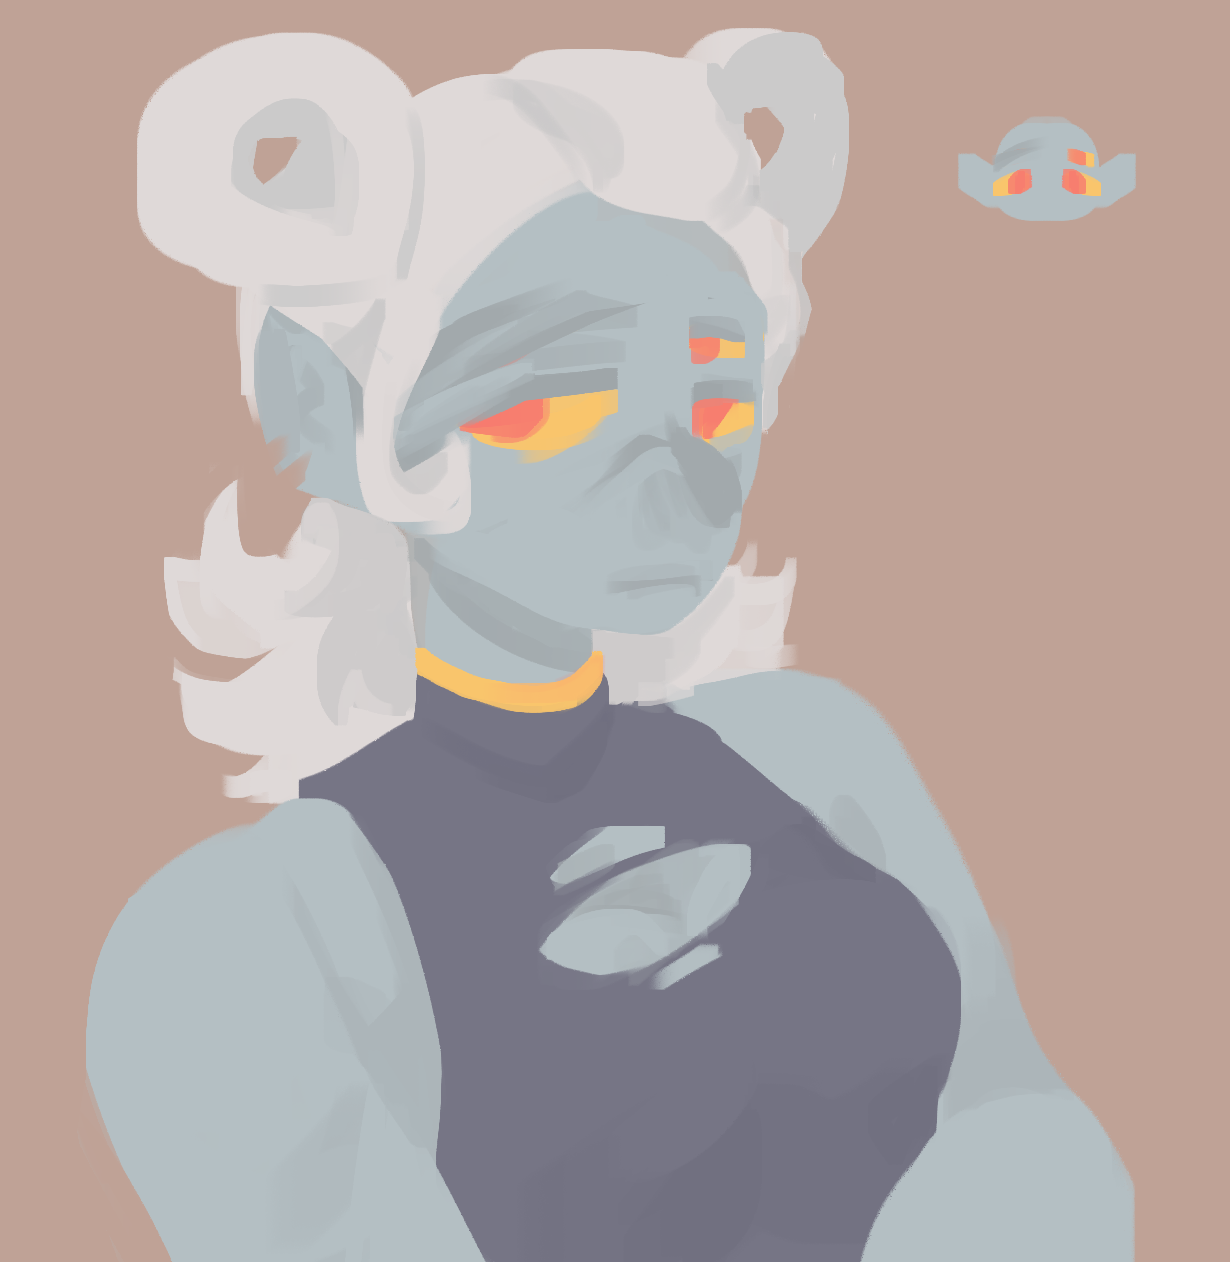 a lineless illustration of clek, a teal skinned fumi